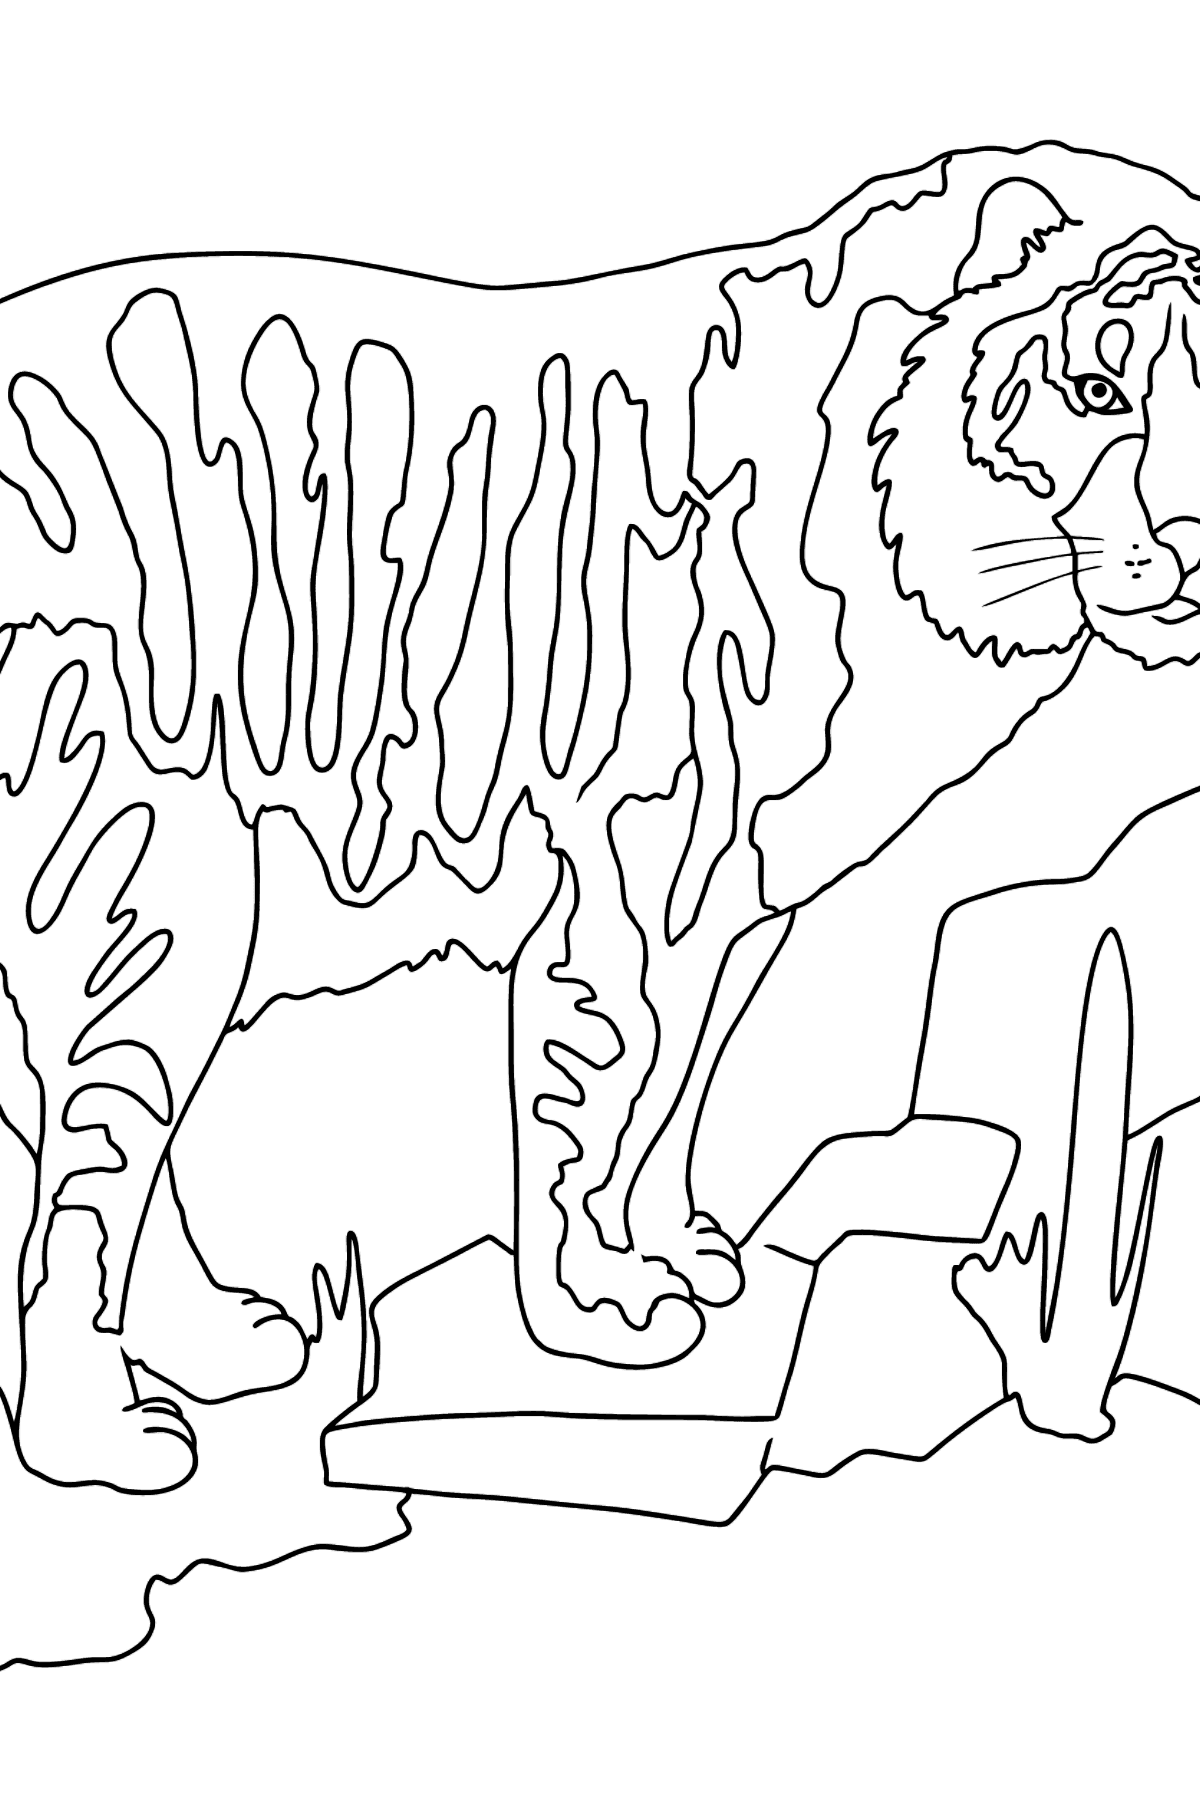 Coloring Page - A Tiger is Looking for Prey - Coloring Pages for Kids